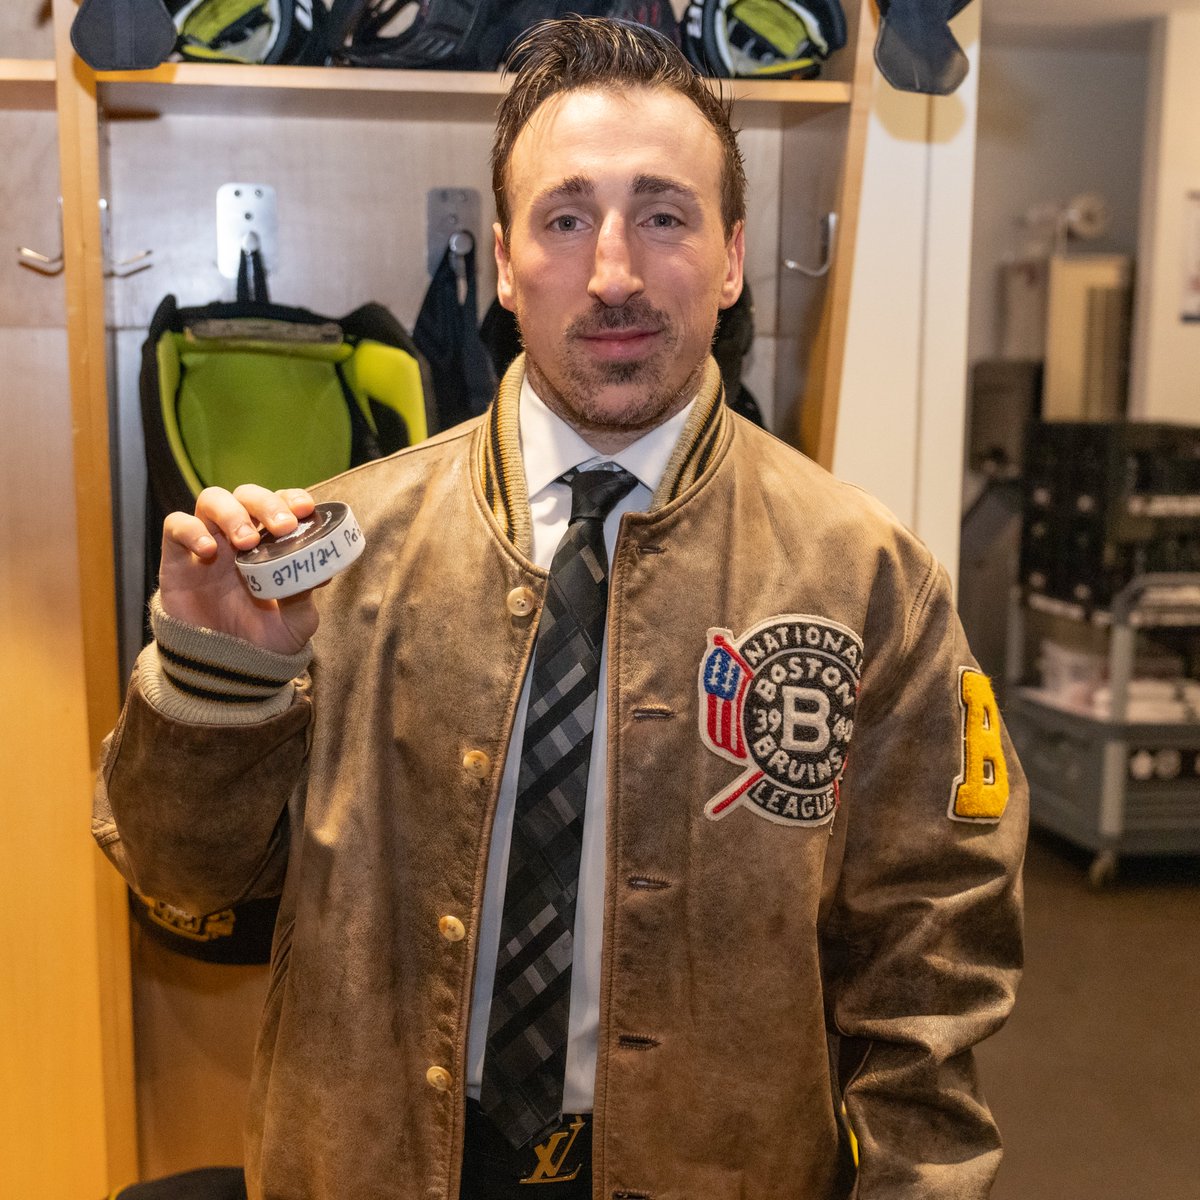 The jacket ✔️ 

The milestone puck ✔️ 

The Game 4 win ✔️